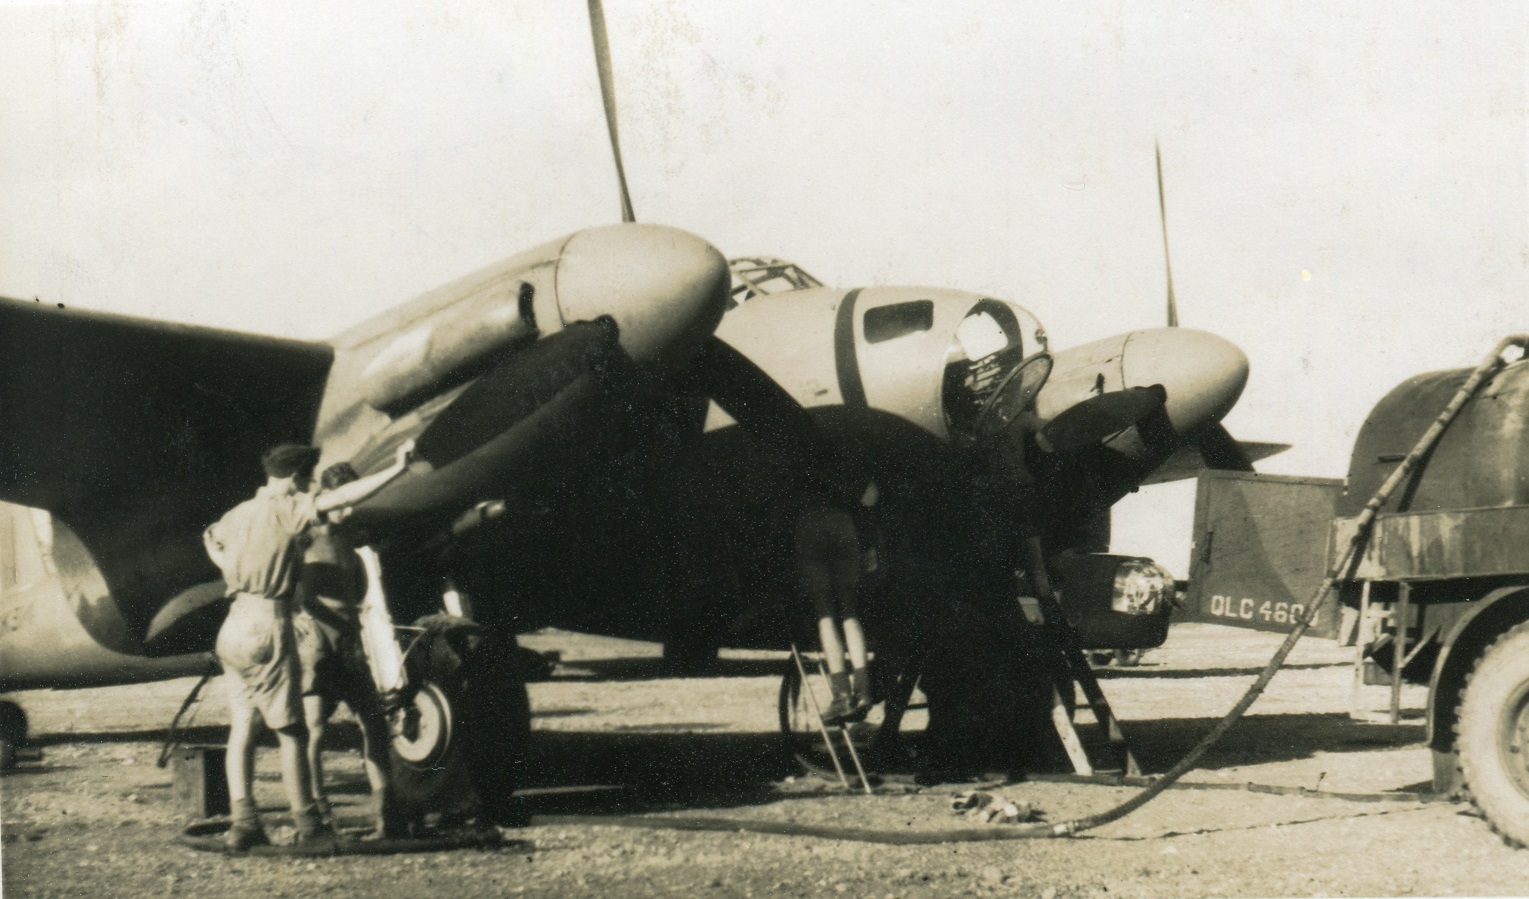 A Mosquito of No 544 Squadron in Gibraltar